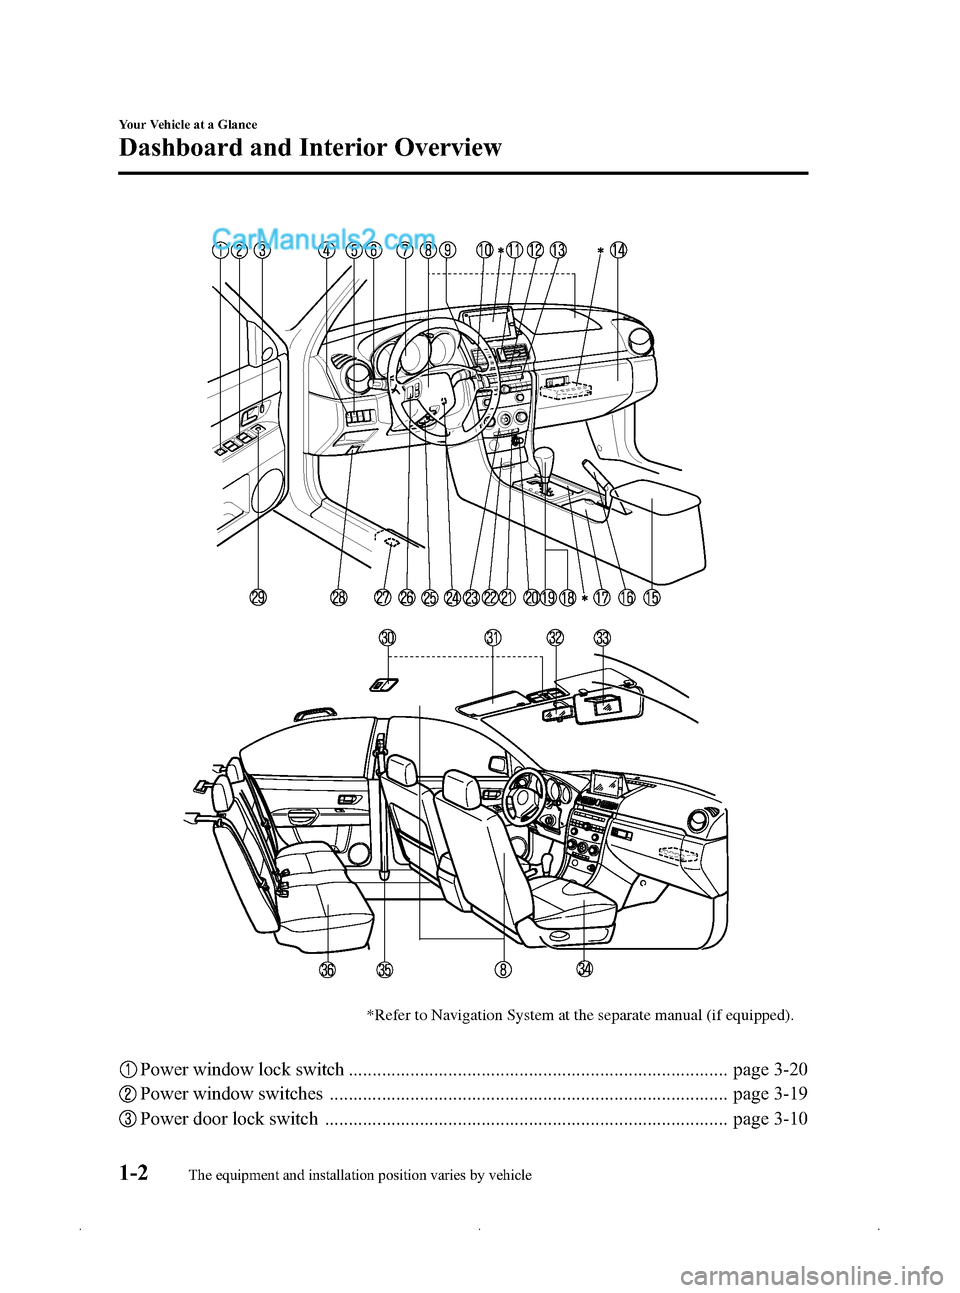 MAZDA MODEL MAZDASPEED 3 2009  Owners Manual (in English) Black plate (8,1)
*Refer to Navigation System at the separate manual (if equipped).
Power window lock switch ................................................................................ page 3-20
